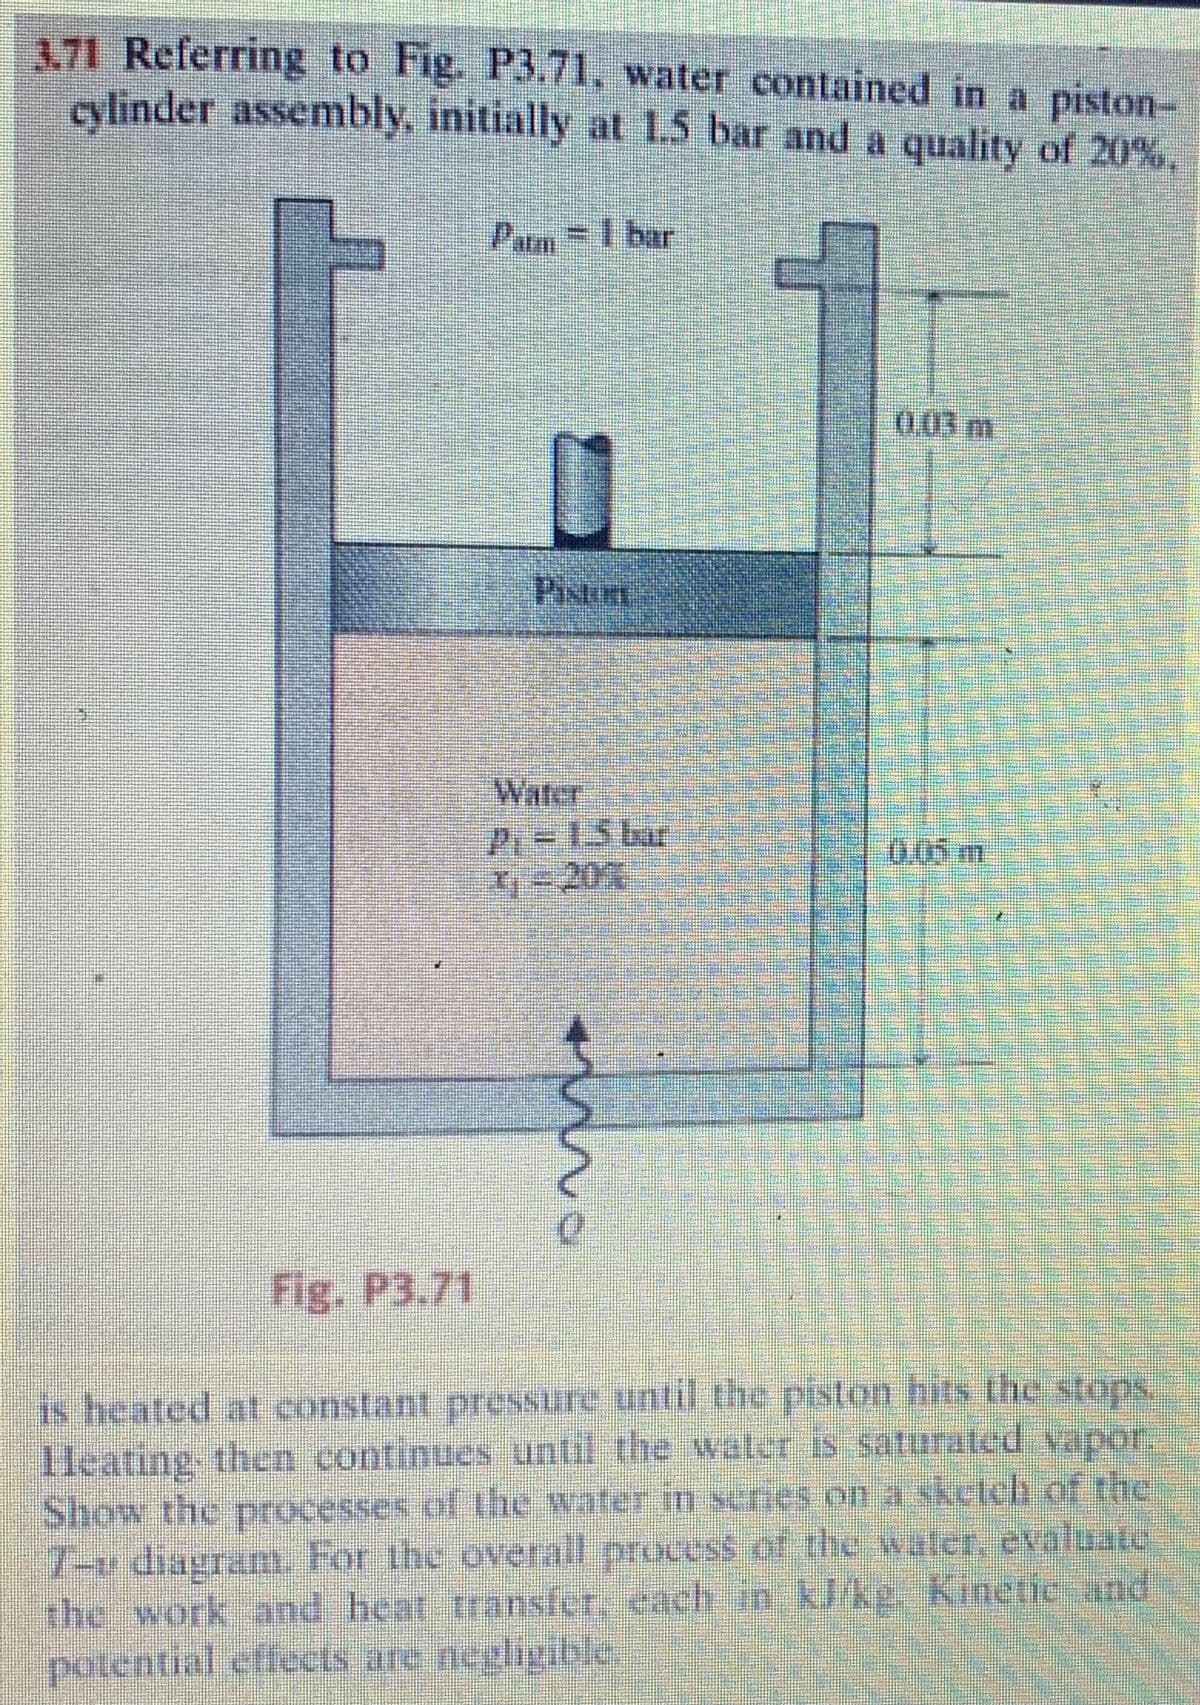 3.71 Referring to Fig. P3.71, water contained in a piston-
cylinder assembly, initially at 1.5 bar and a quality of 20%,
Fig. P3.71
Pambar
U
Pistme
Water
P=15 br
7 - 201
m.
0
15m
is heated at constant pressure until the piston hits the stops.
Heating then continues until the water is saturated vapor.
Show the processes of the water in series on a sketch of the
T-v diagram. For the overall process of the water, evaluate
the work and heat transfer, each in kJ/kg. Kinetic and
potential effects are negligible